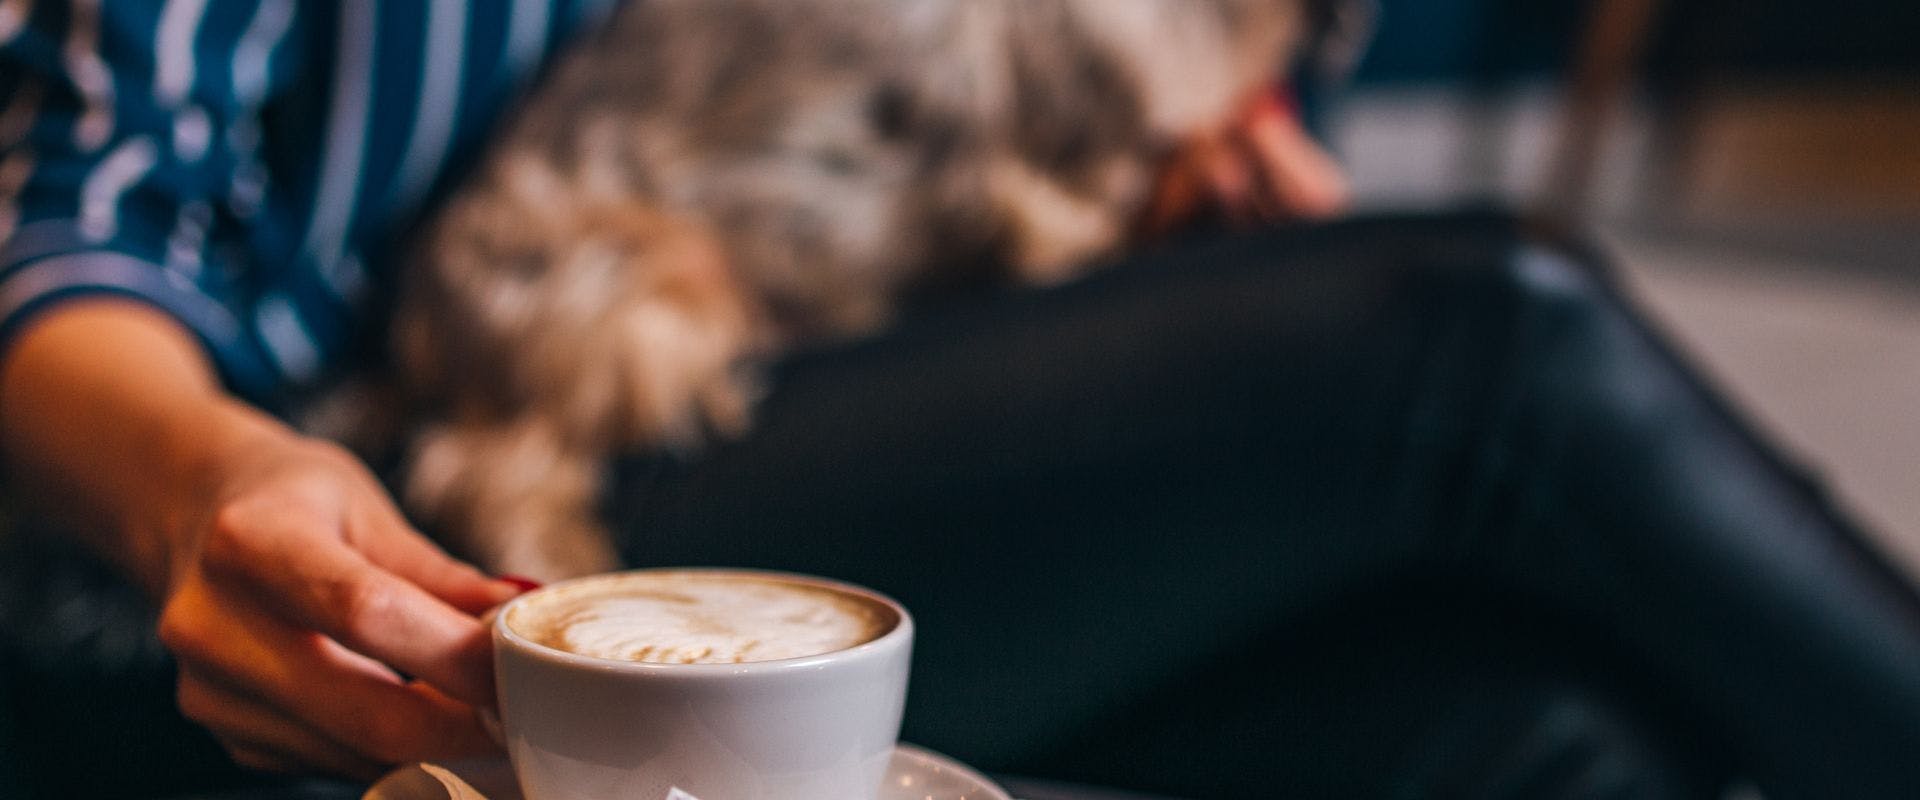 Latte in a white mug with a person and dog in the background